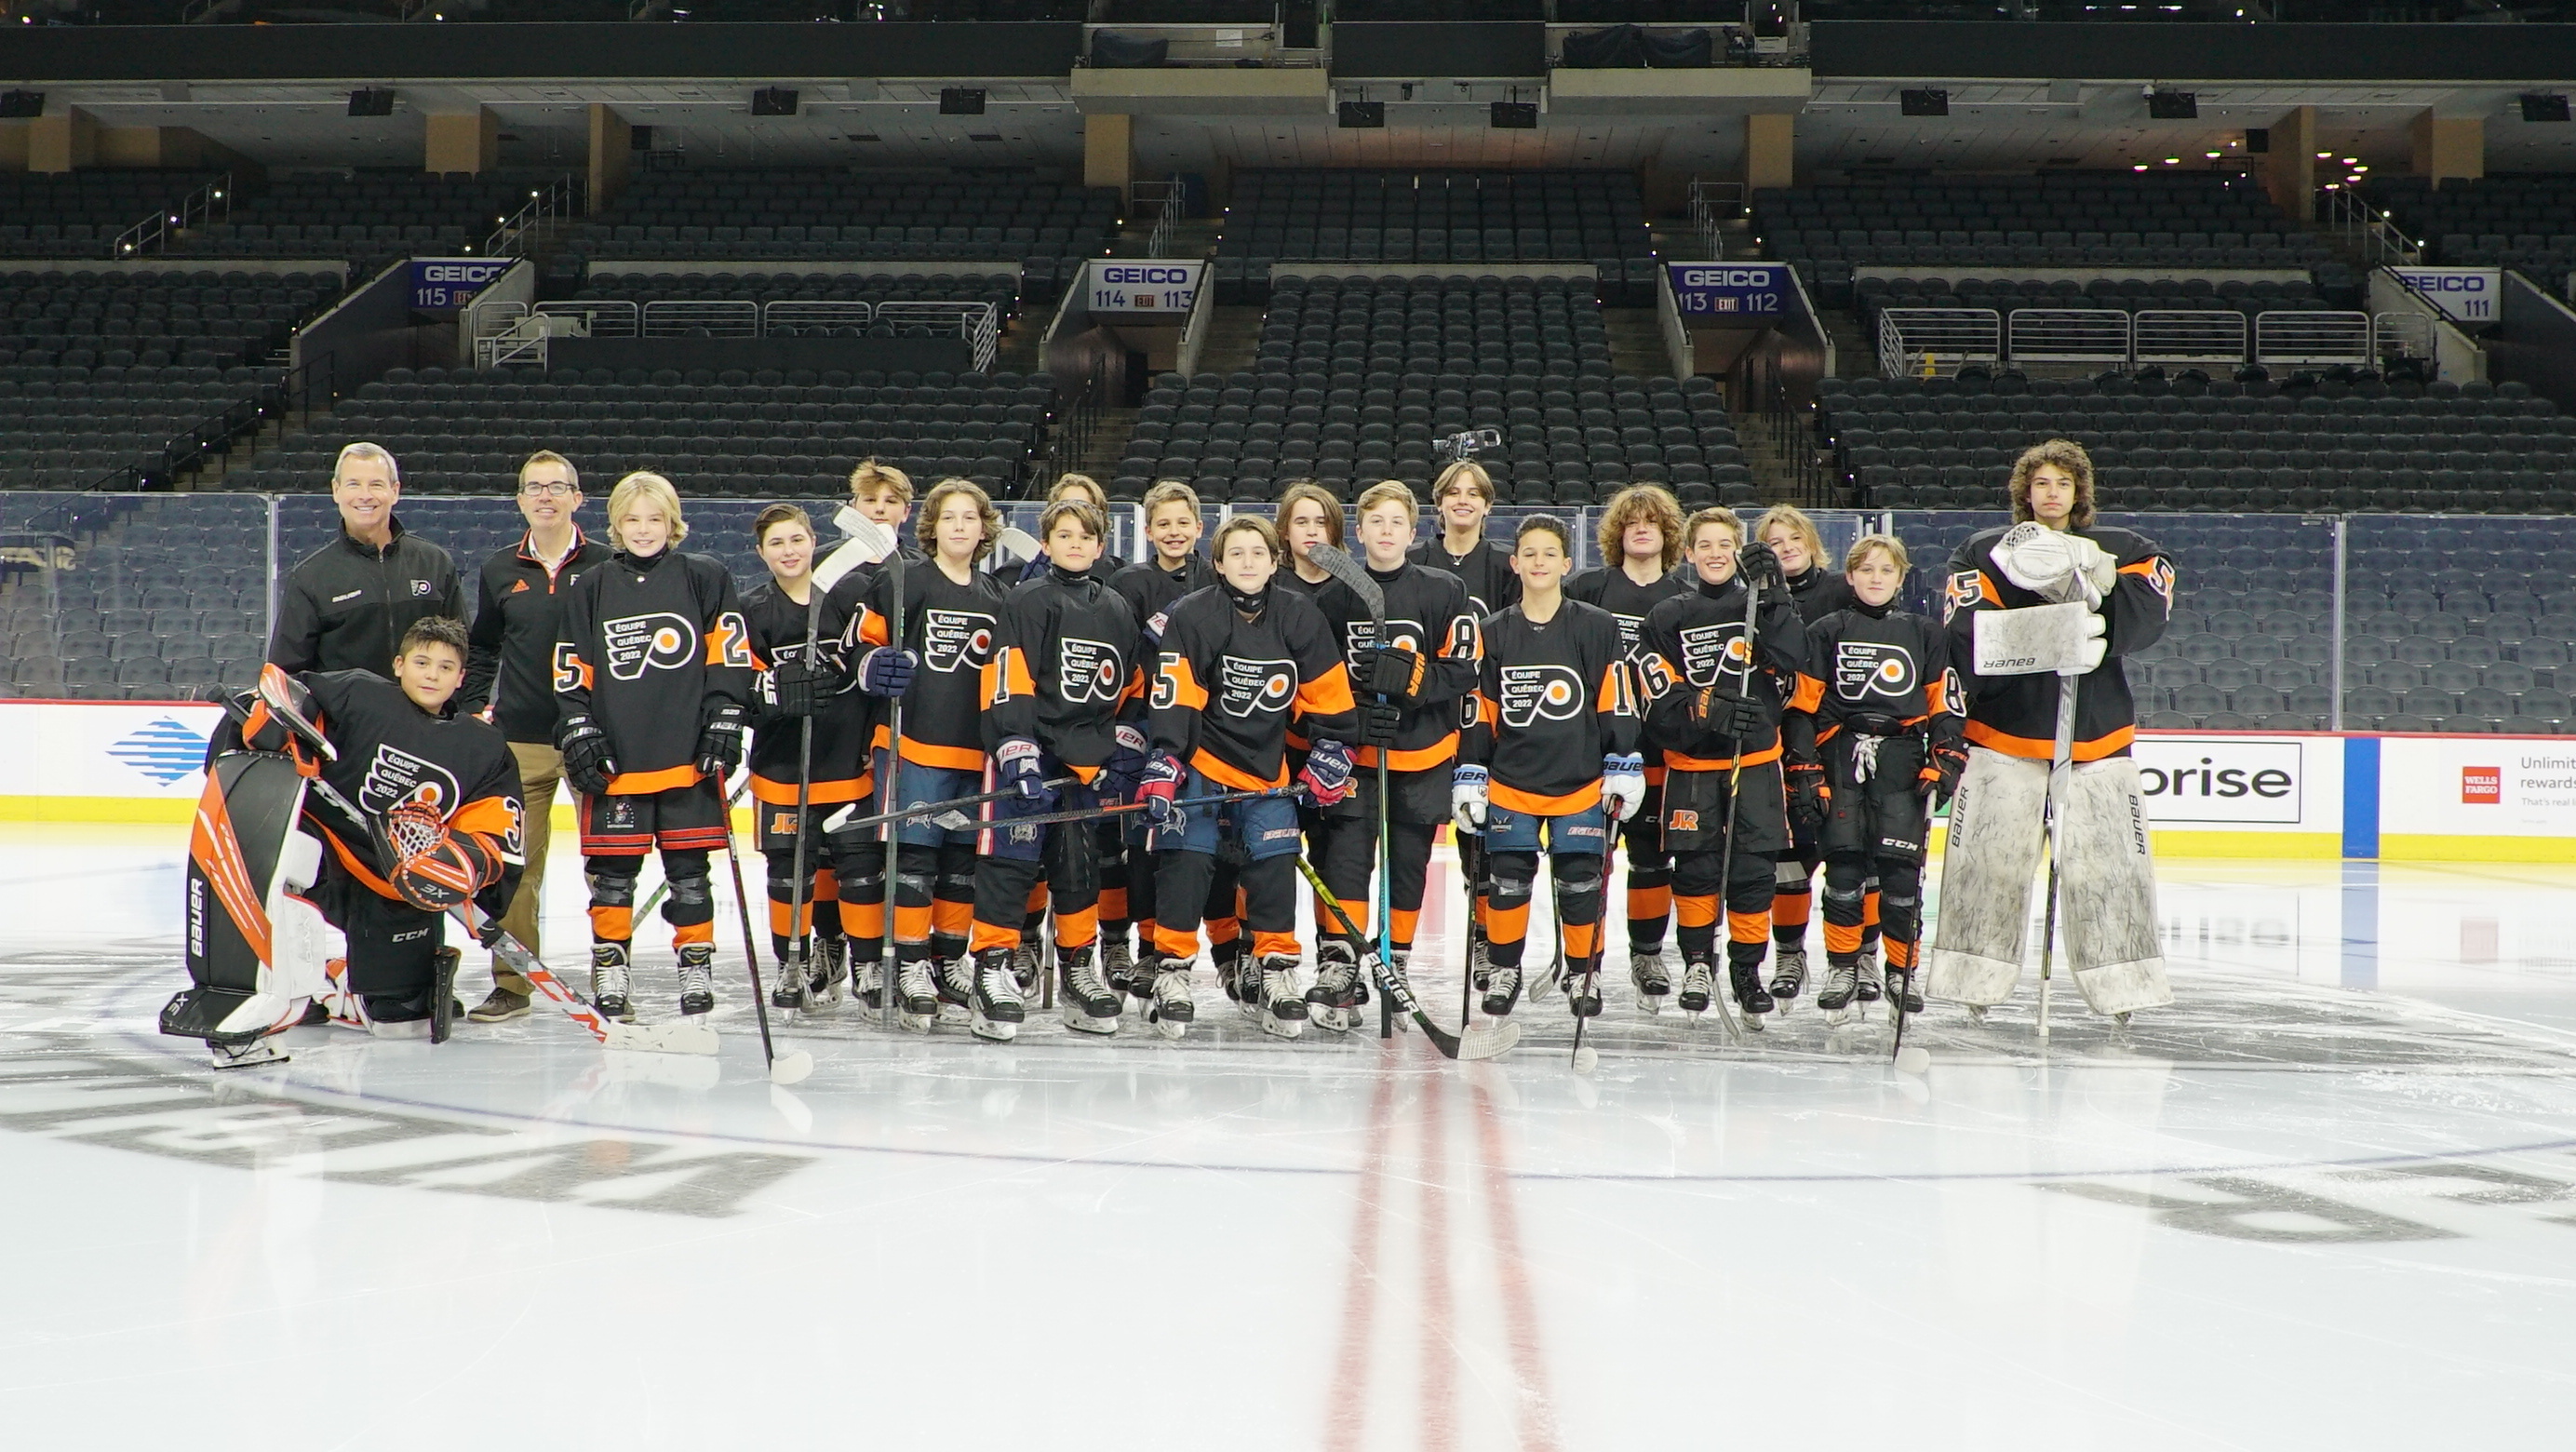 Flyers Quebec peewee team off to great start at prestigious youth tournament pic